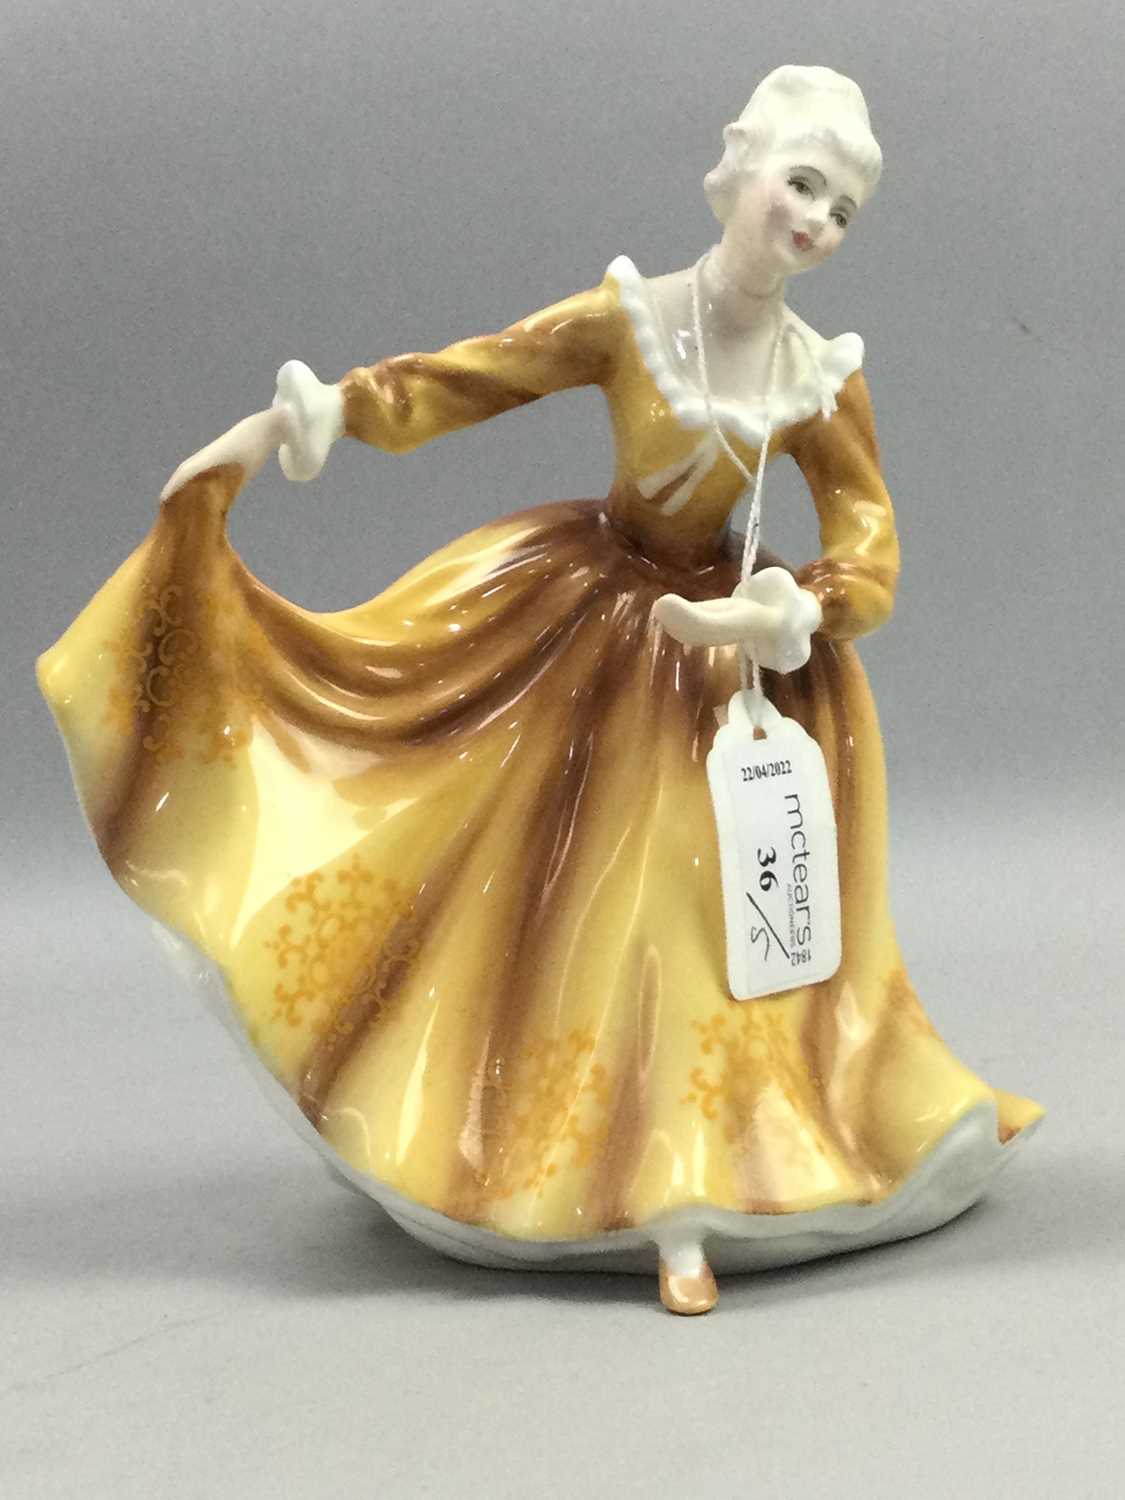 Lot 36 - A LOT OF FOUR ROYAL DOULTON FIGURES AND ANOTHER FIGURE